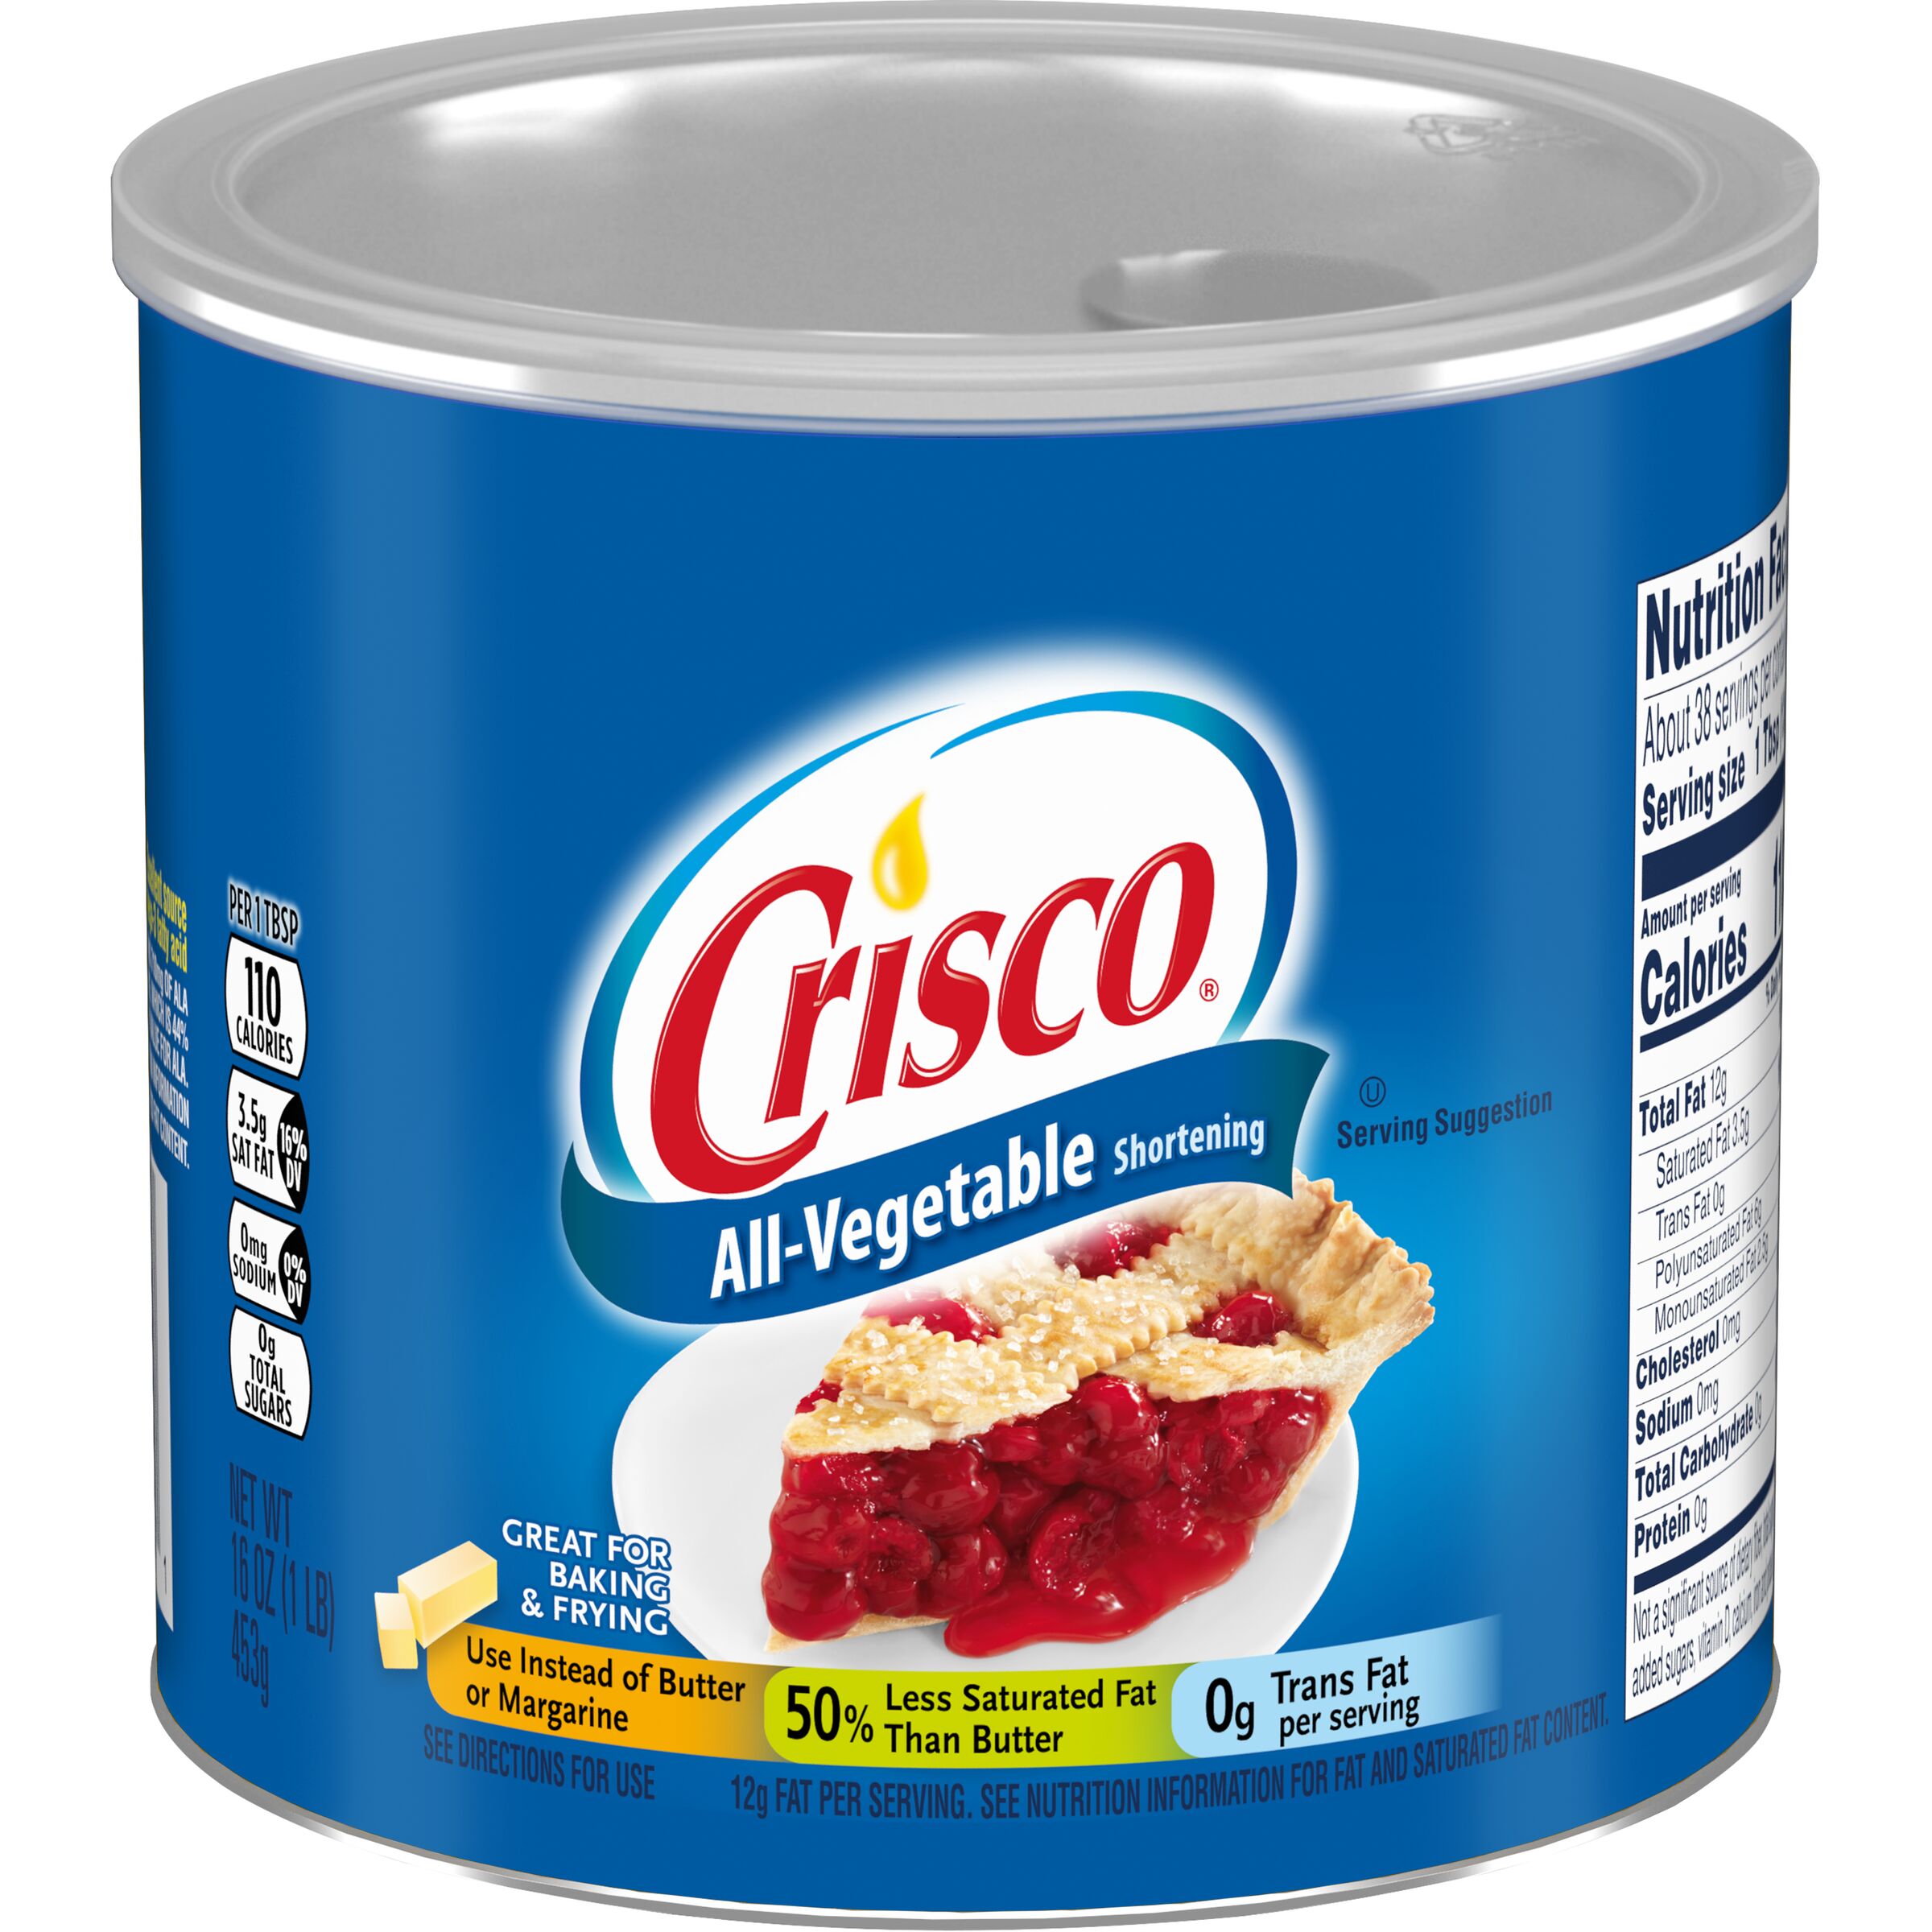 Crisco All Vegetable Shortening, 16 oz Can - image 1 of 3